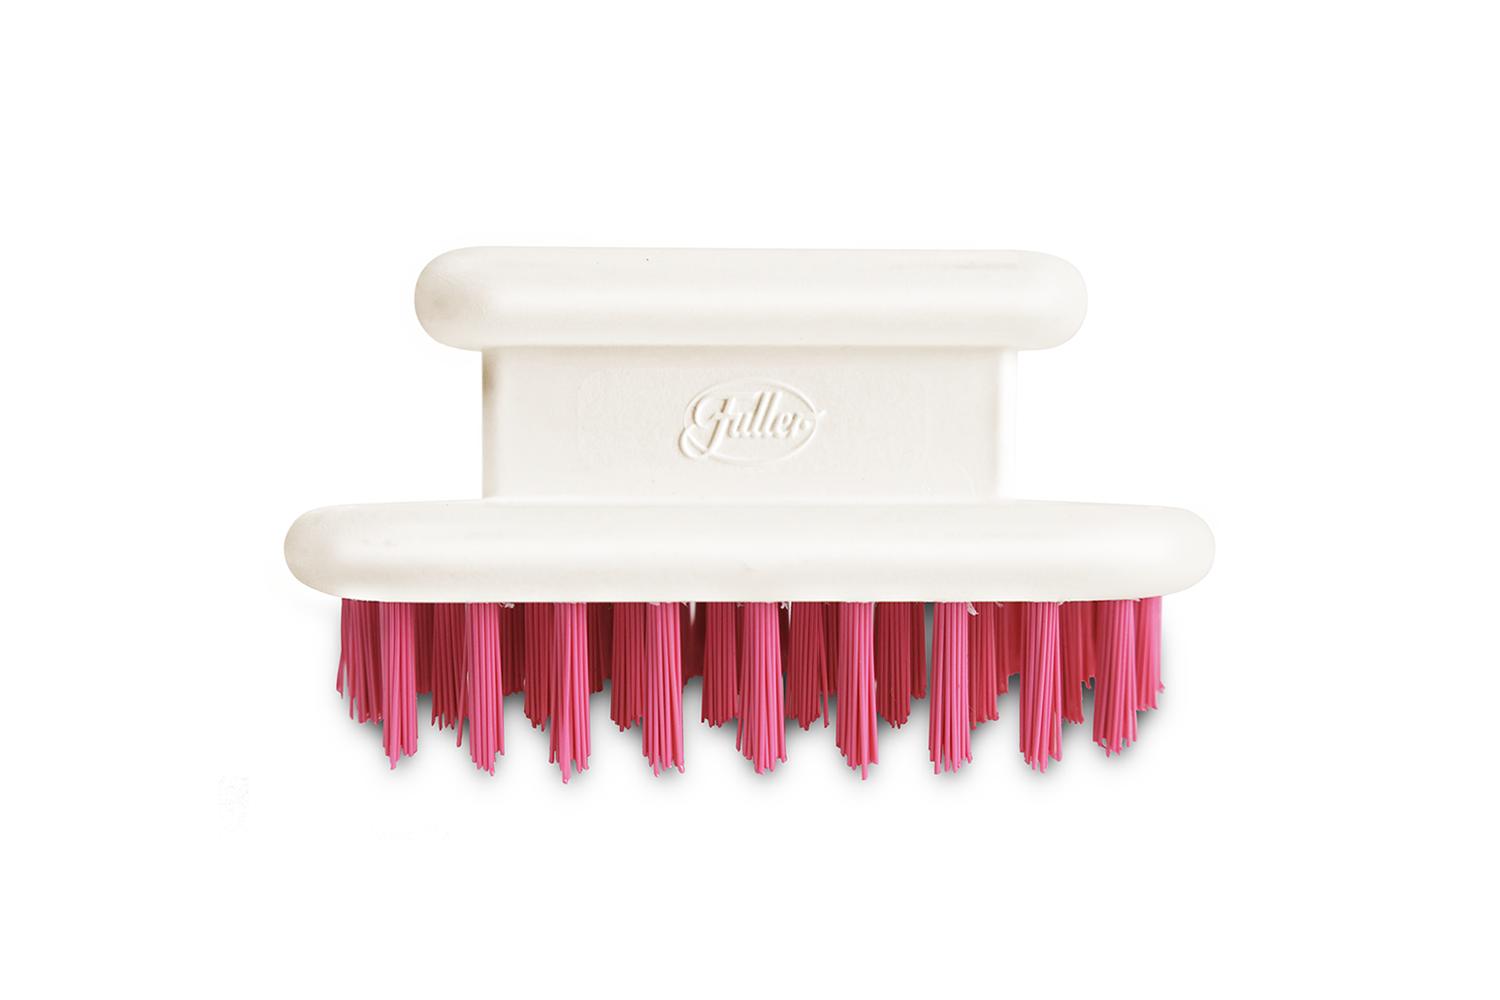 https://fuller.com/cdn/shop/products/pretty-pink-compact-veggie-brush-durable-polyester-bristles-cleaning-brushes_1500x1000.jpg?v=1596015335